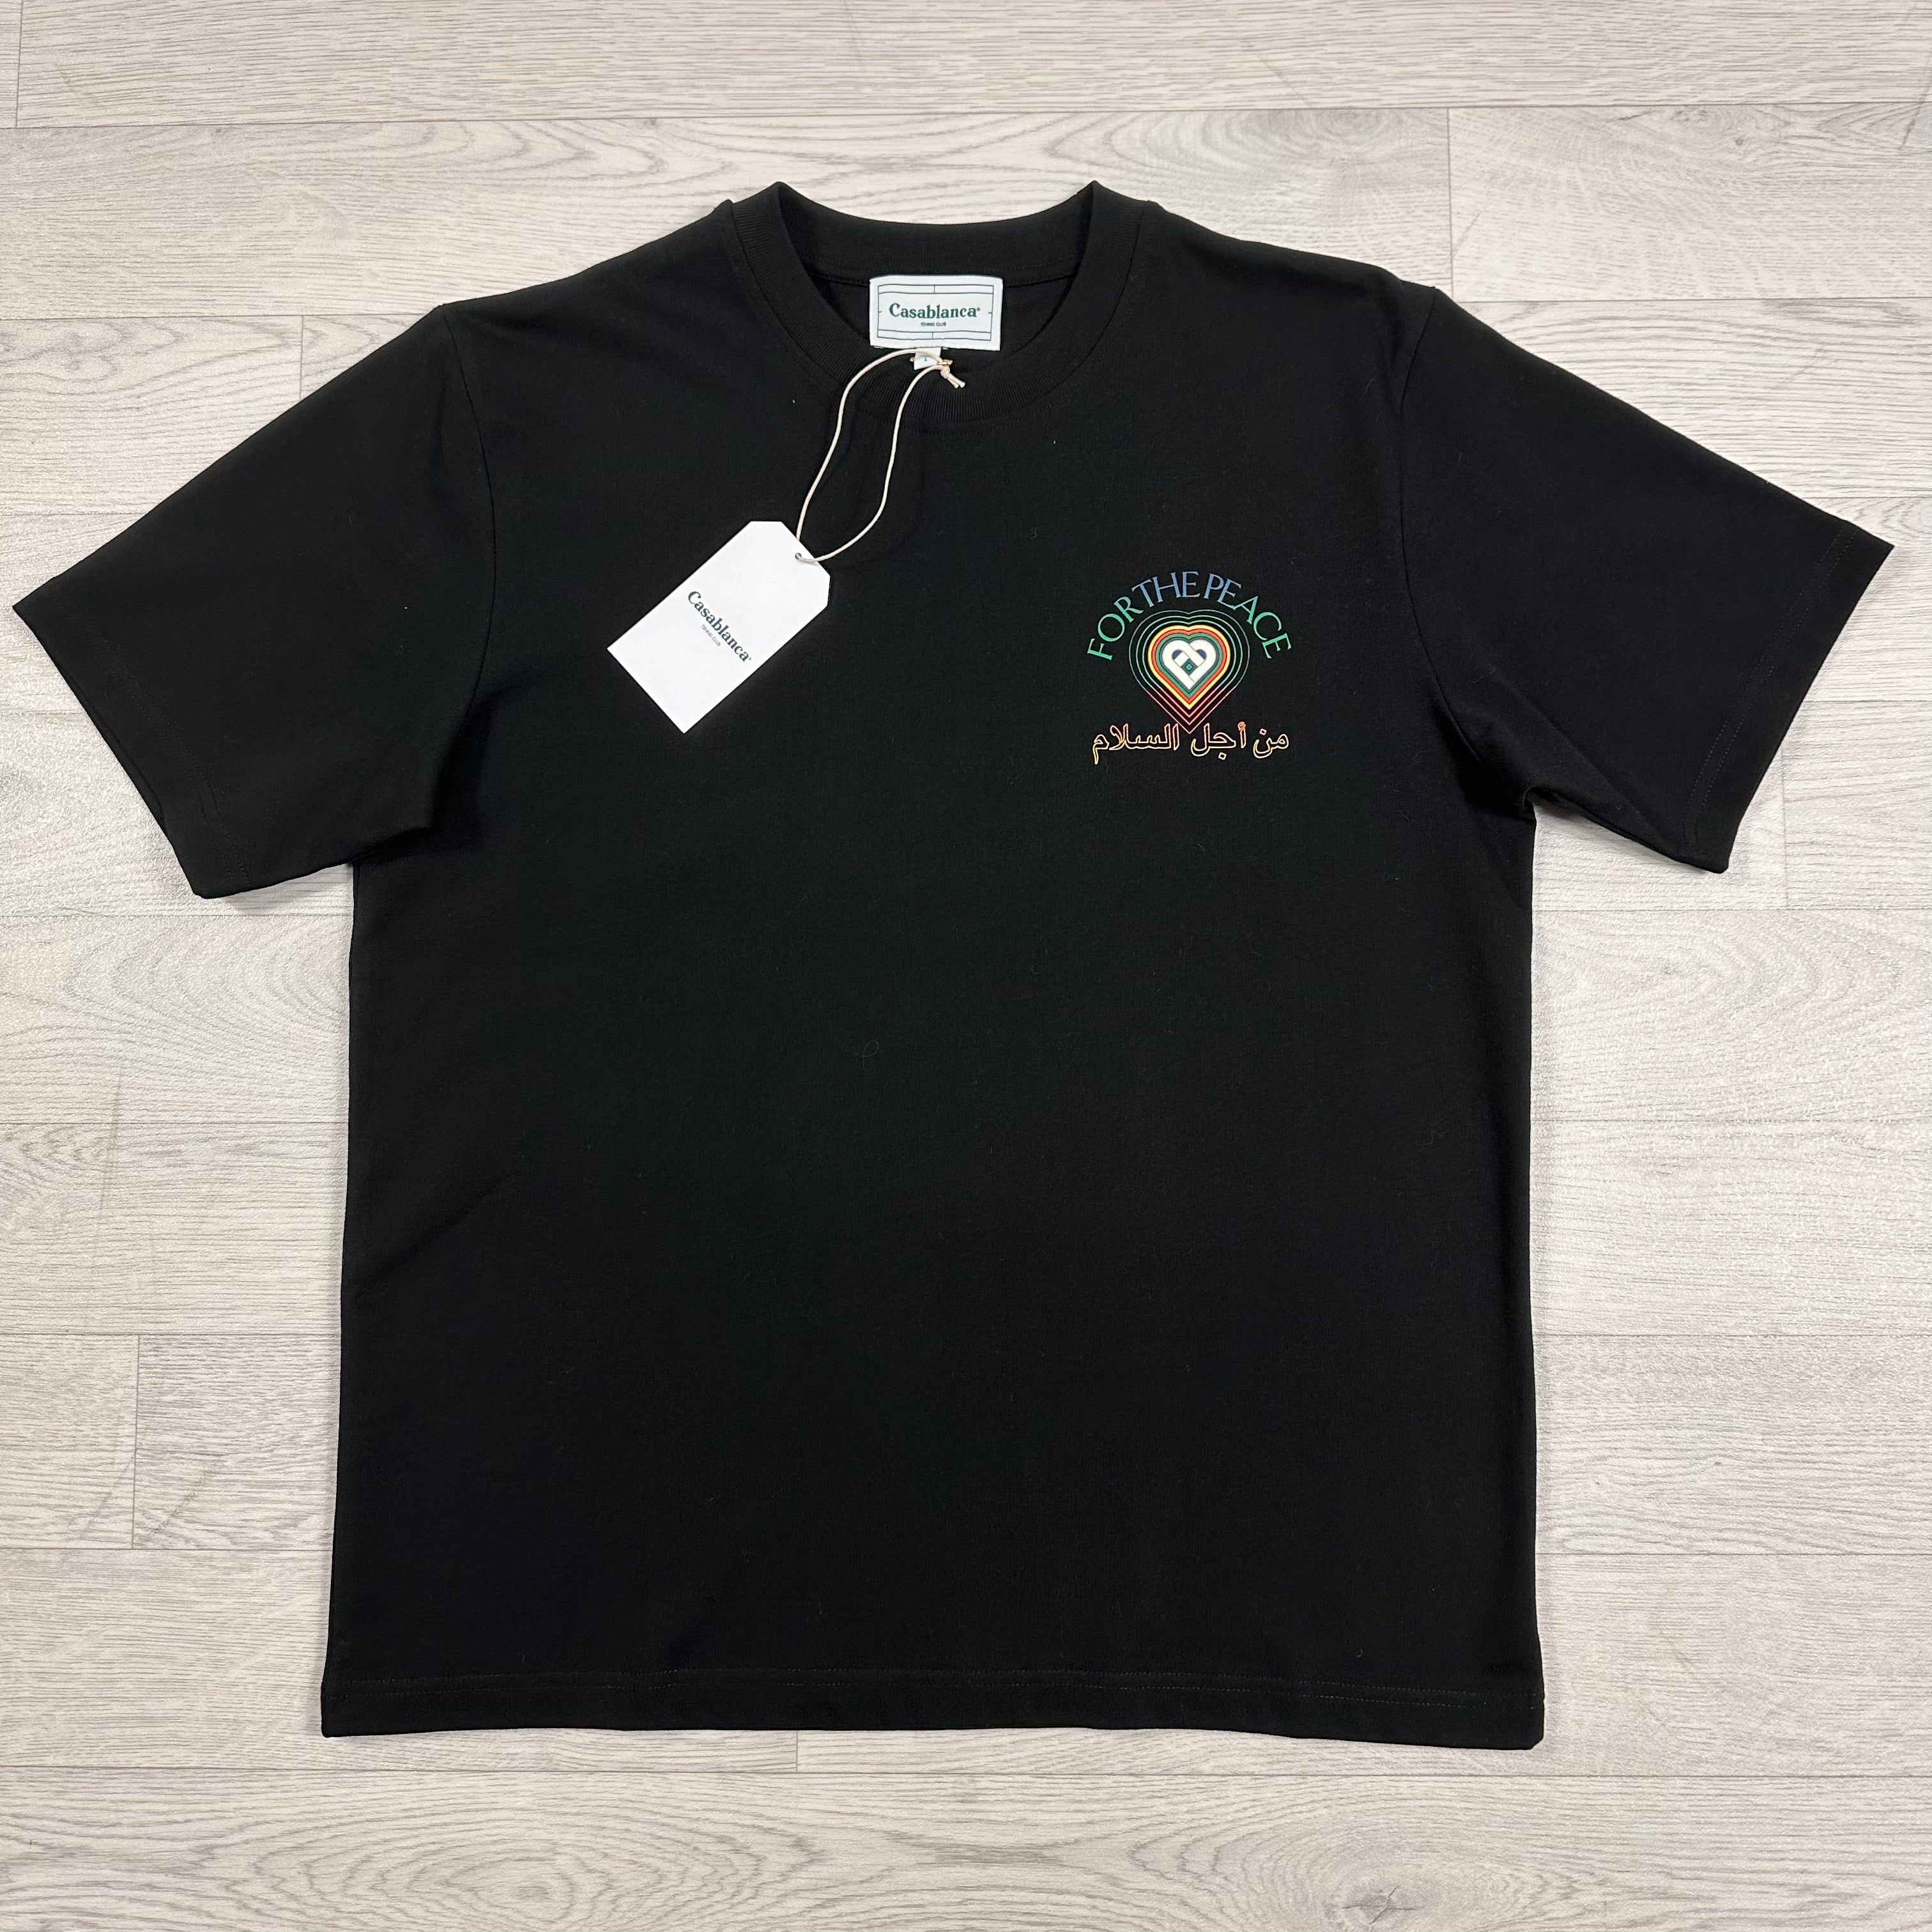 For The Peace T-shirt Black